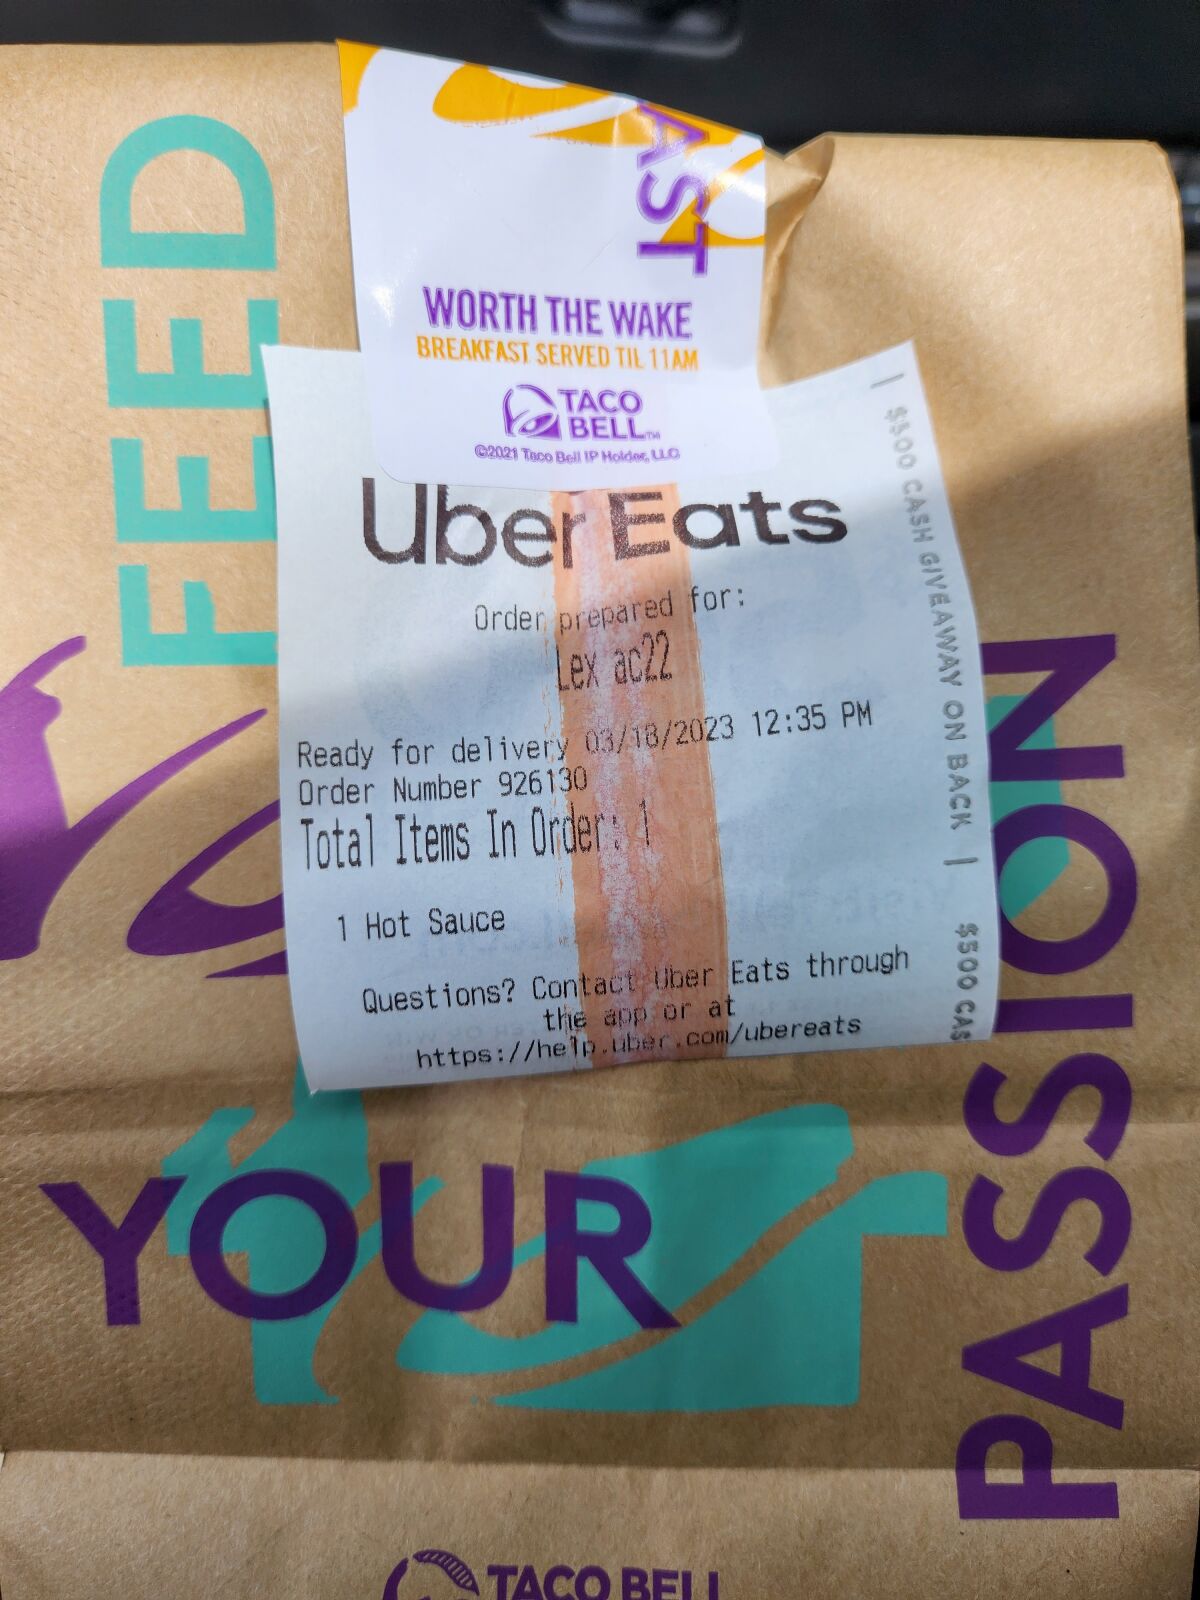 An Uber Eats note is attached to a Taco Bell bag.